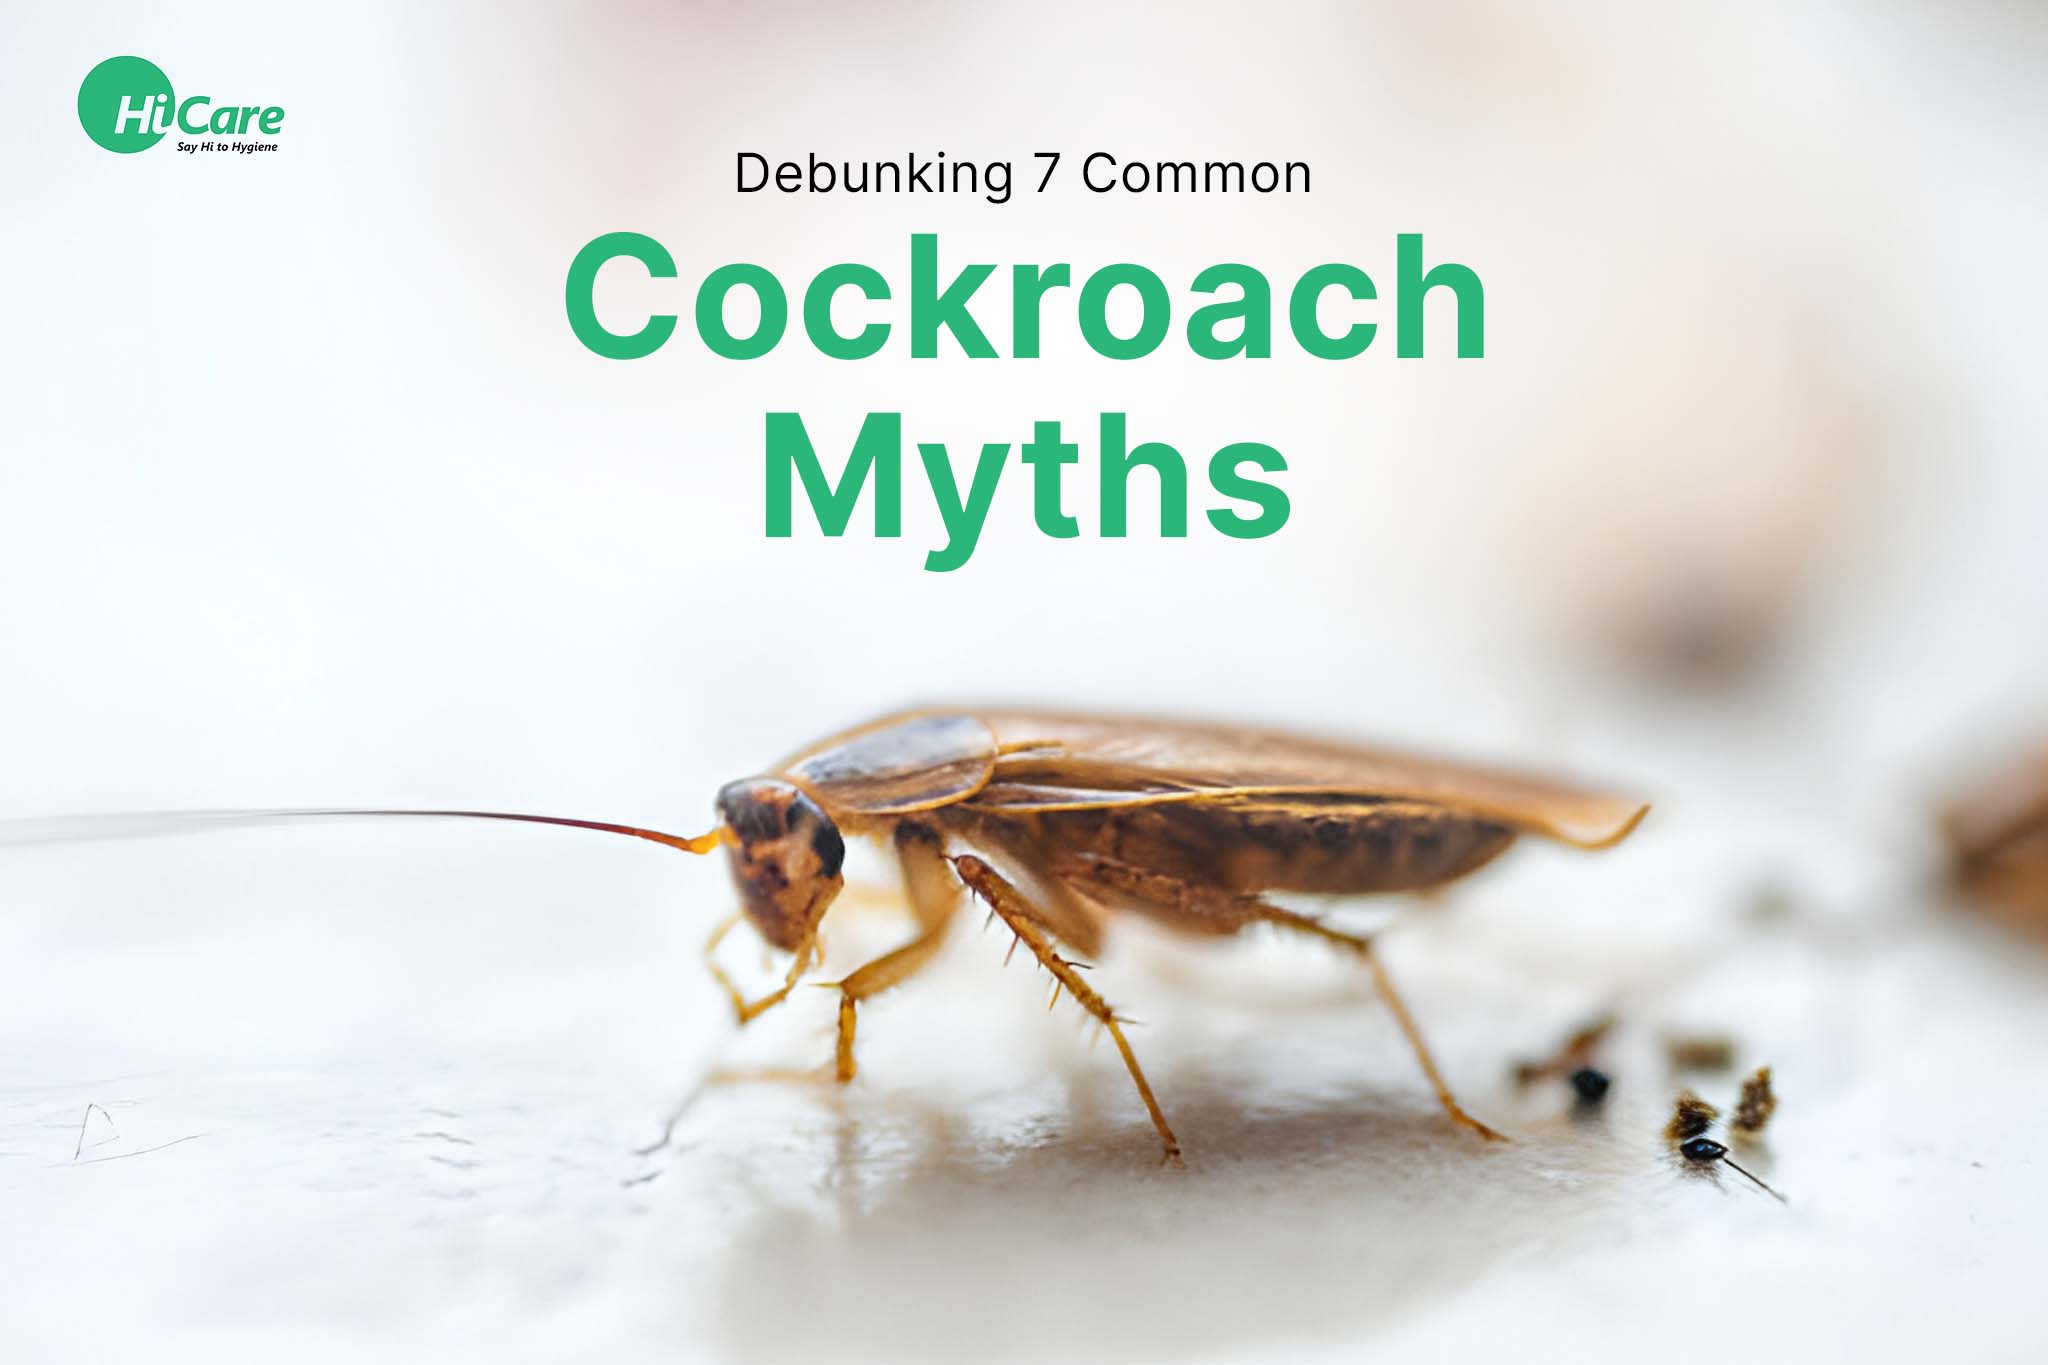 Debunking 7 Common Cockroach Myths